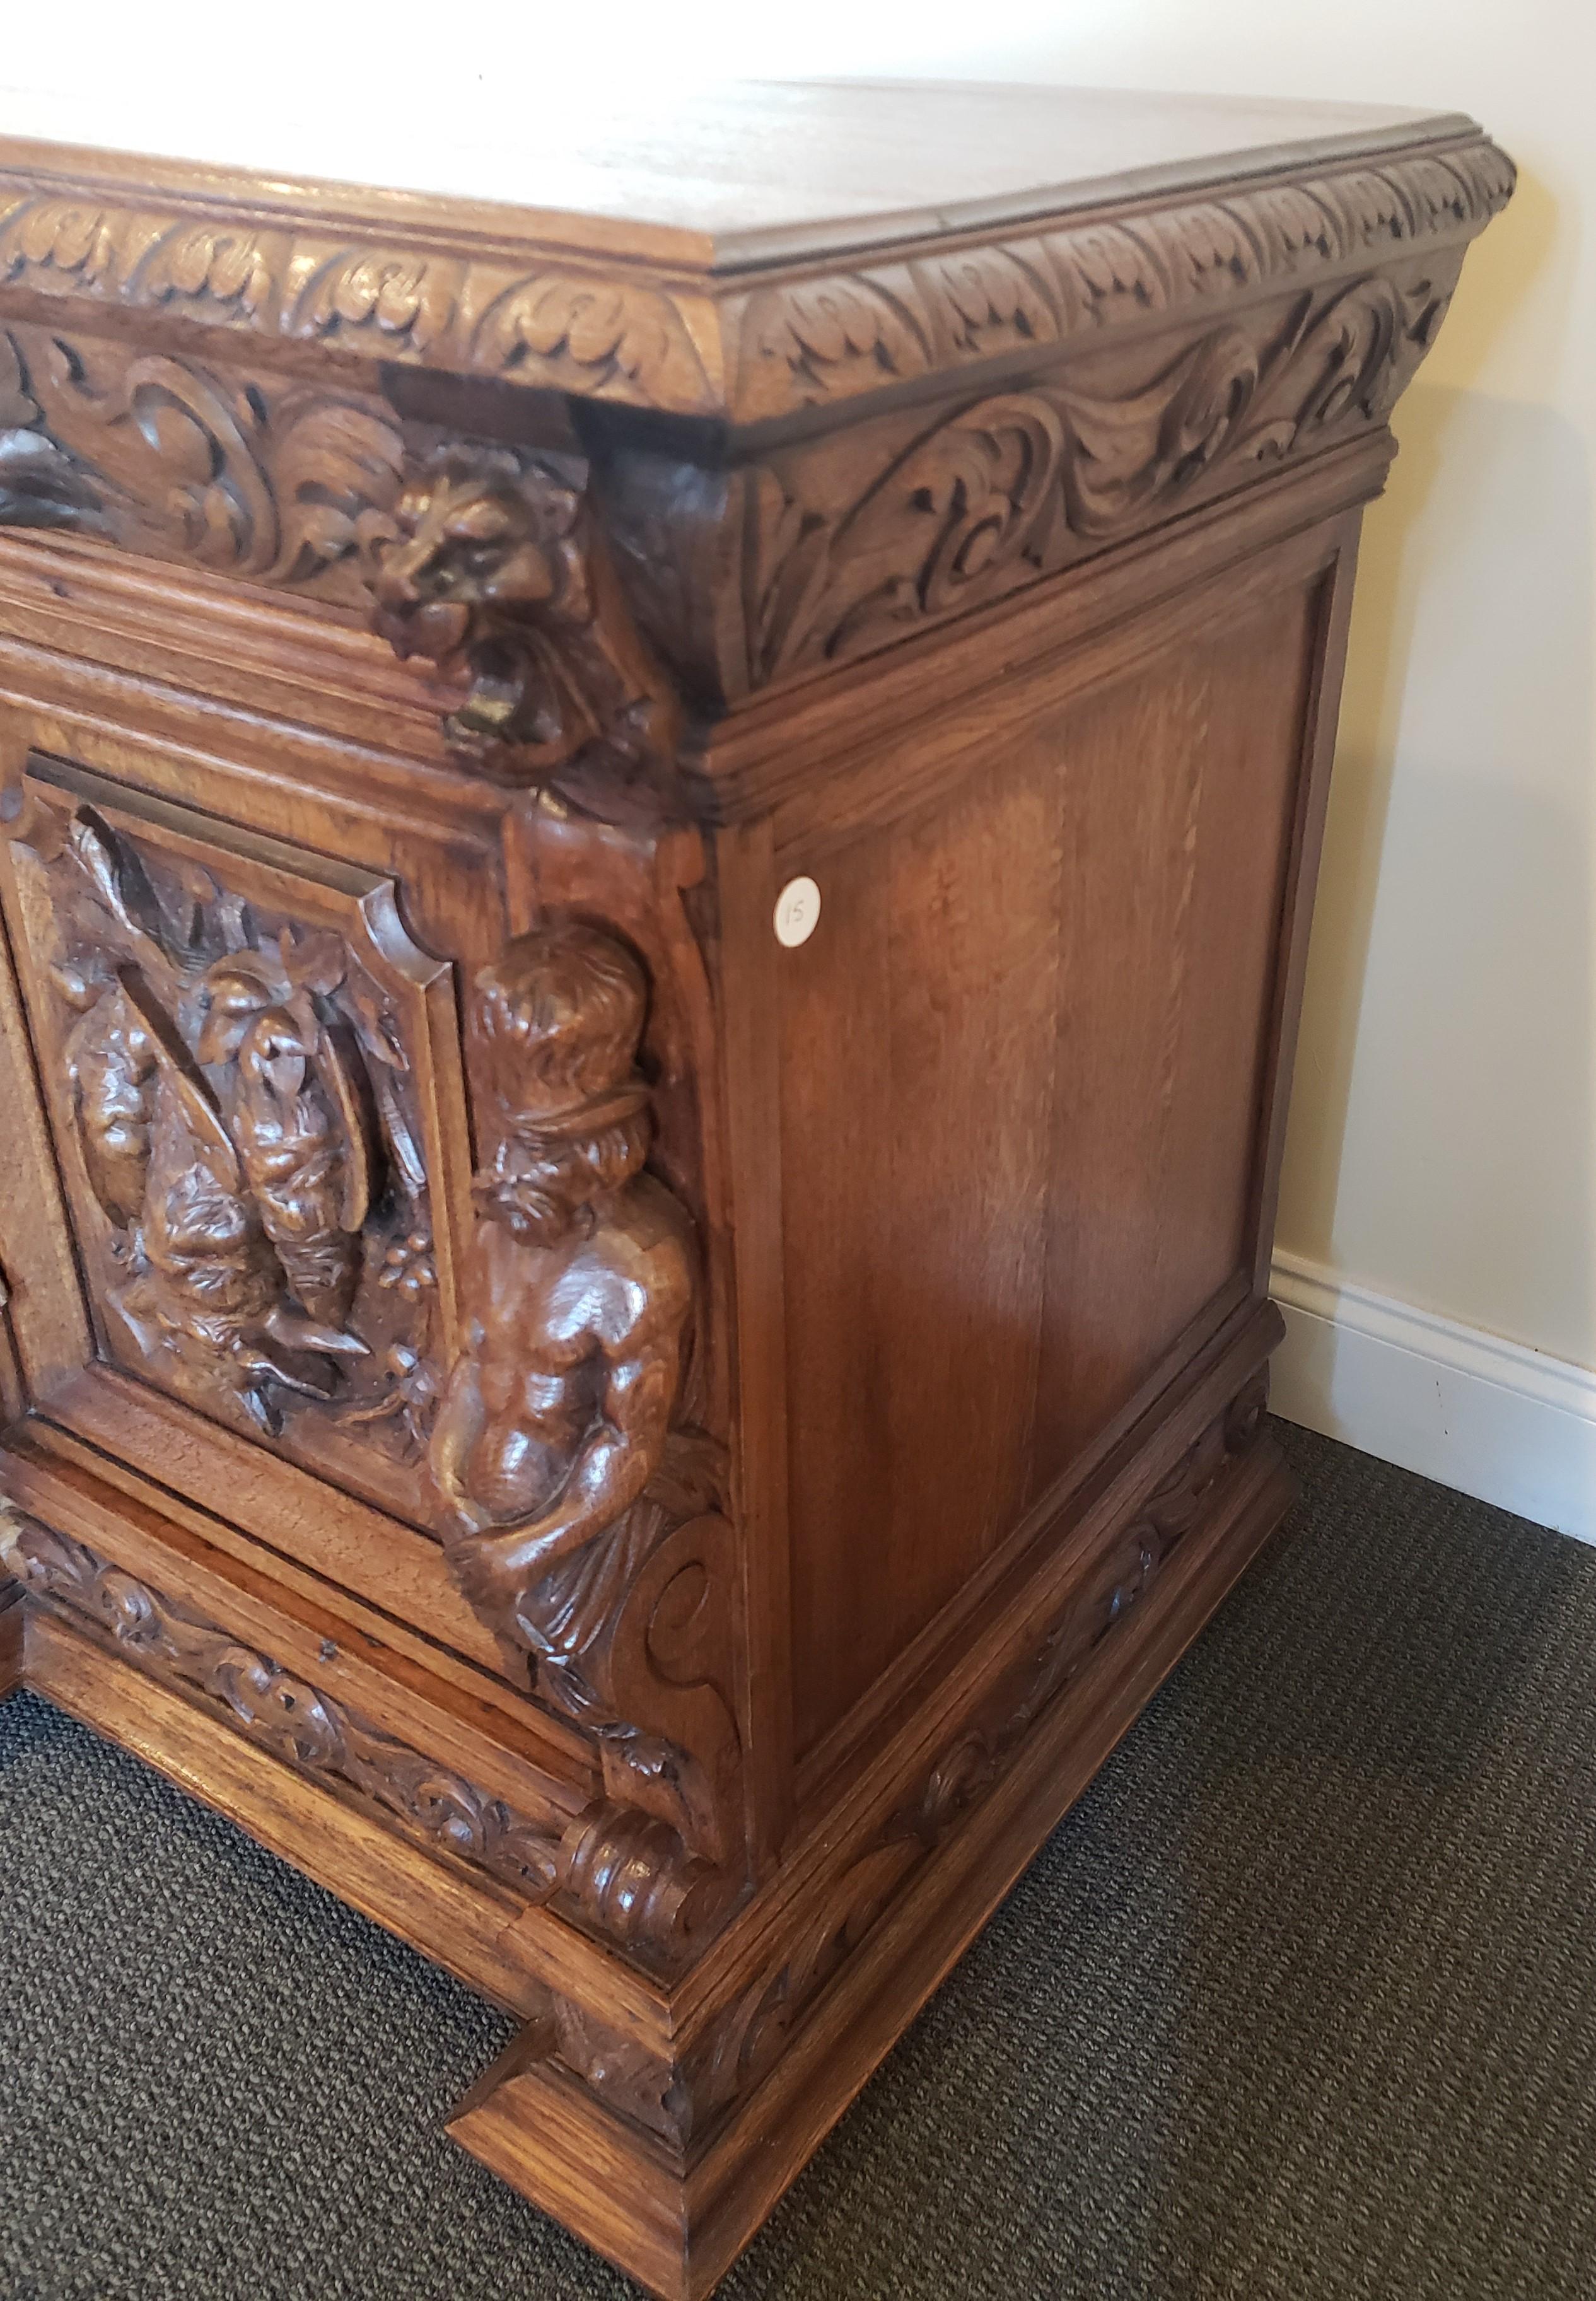 English Victorian oak Jacobean style credenza. This stunning, late 19th century credenza has a profusion of carvings that include full bodied, standing figures that frame the cabinet doors with high carvings of game birds. The 3 drawer pulls are